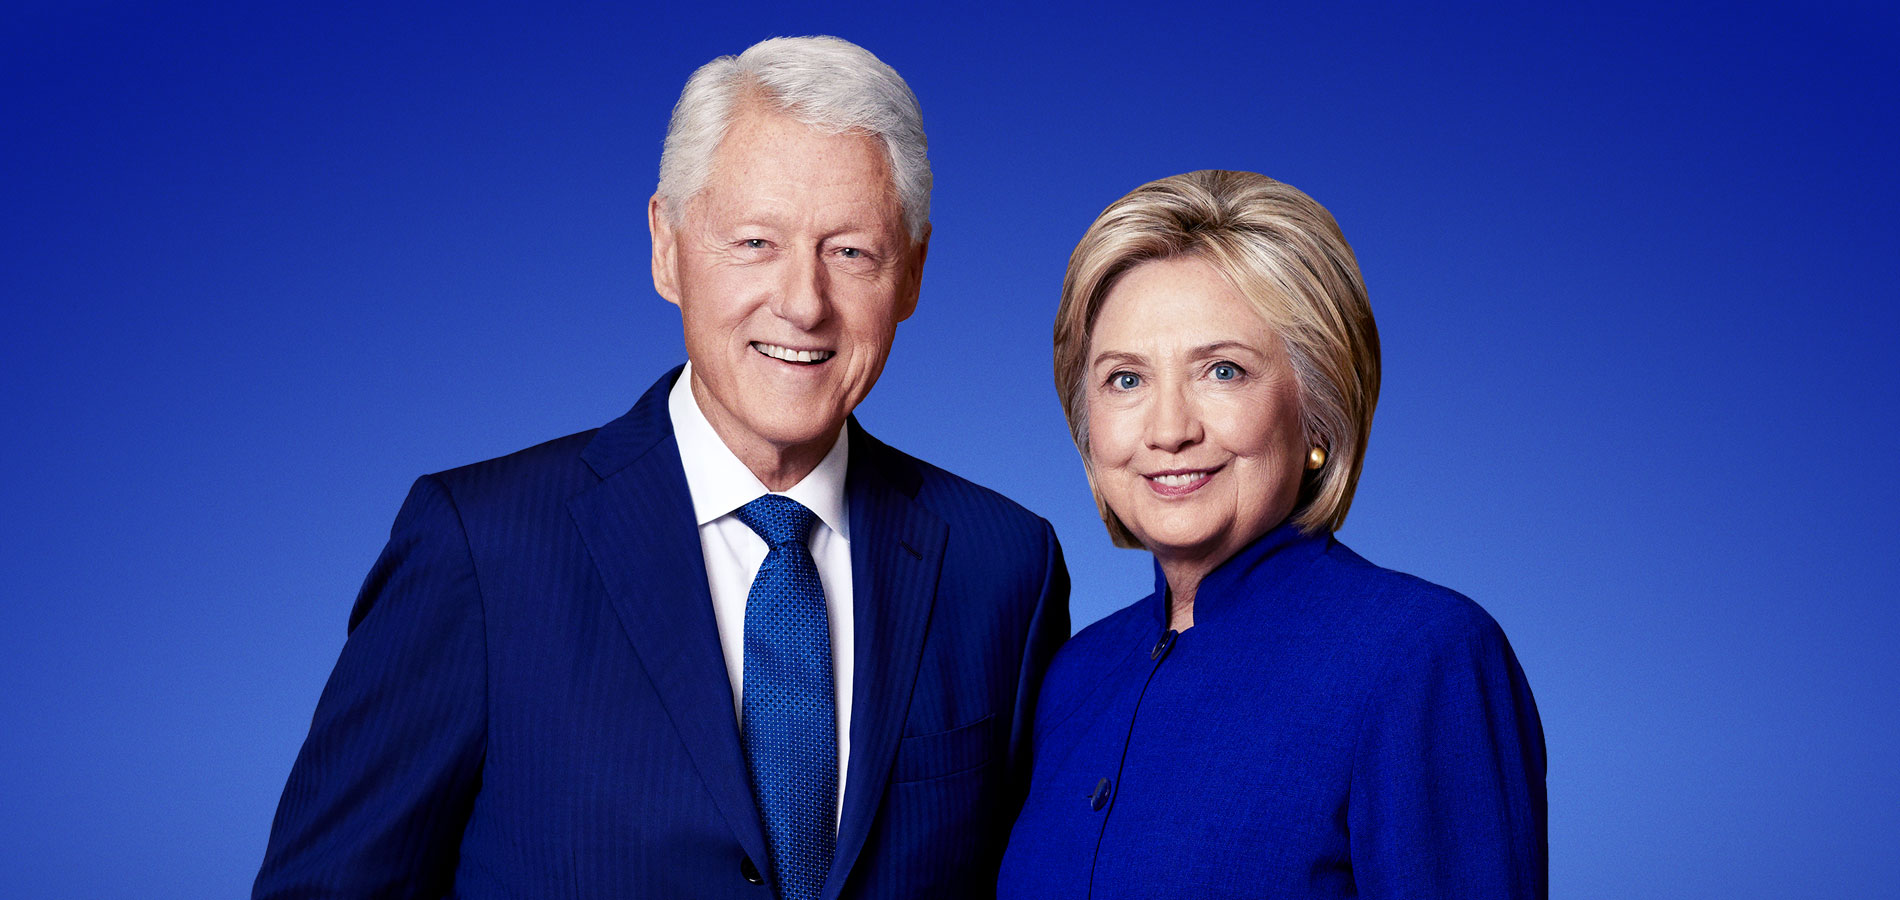 An Evening With The Clintons